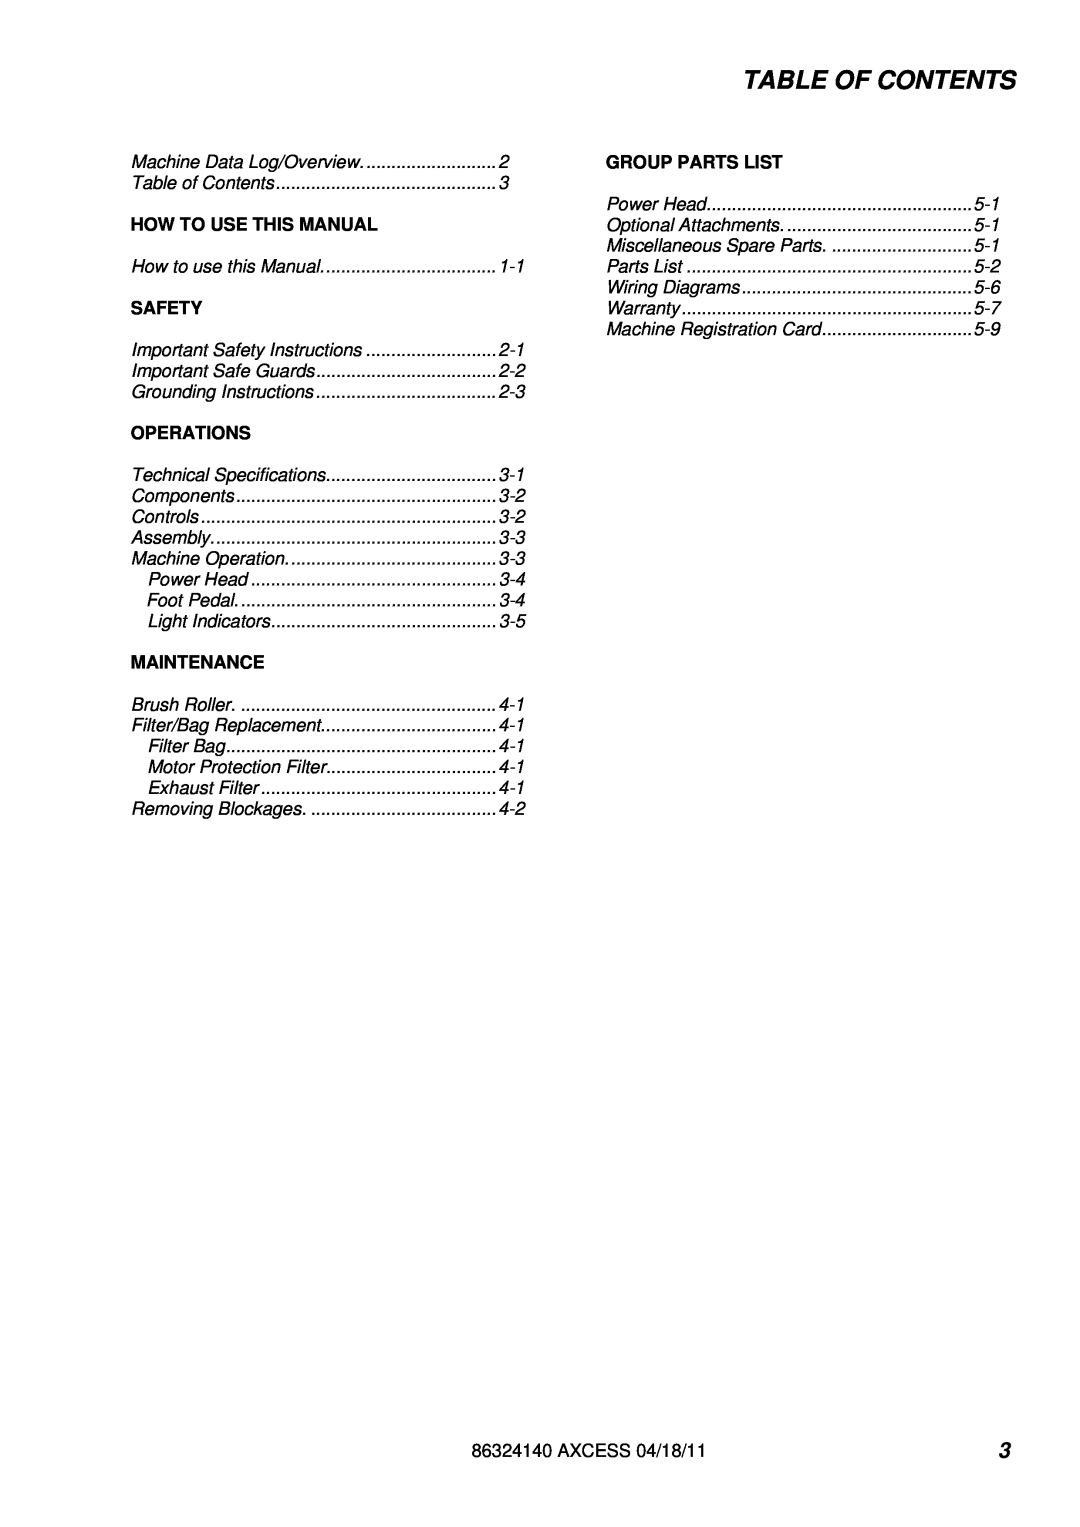 Windsor 1.012-062.0 Table Of Contents, Group Parts List, How To Use This Manual, Safety, Operations, Maintenance 